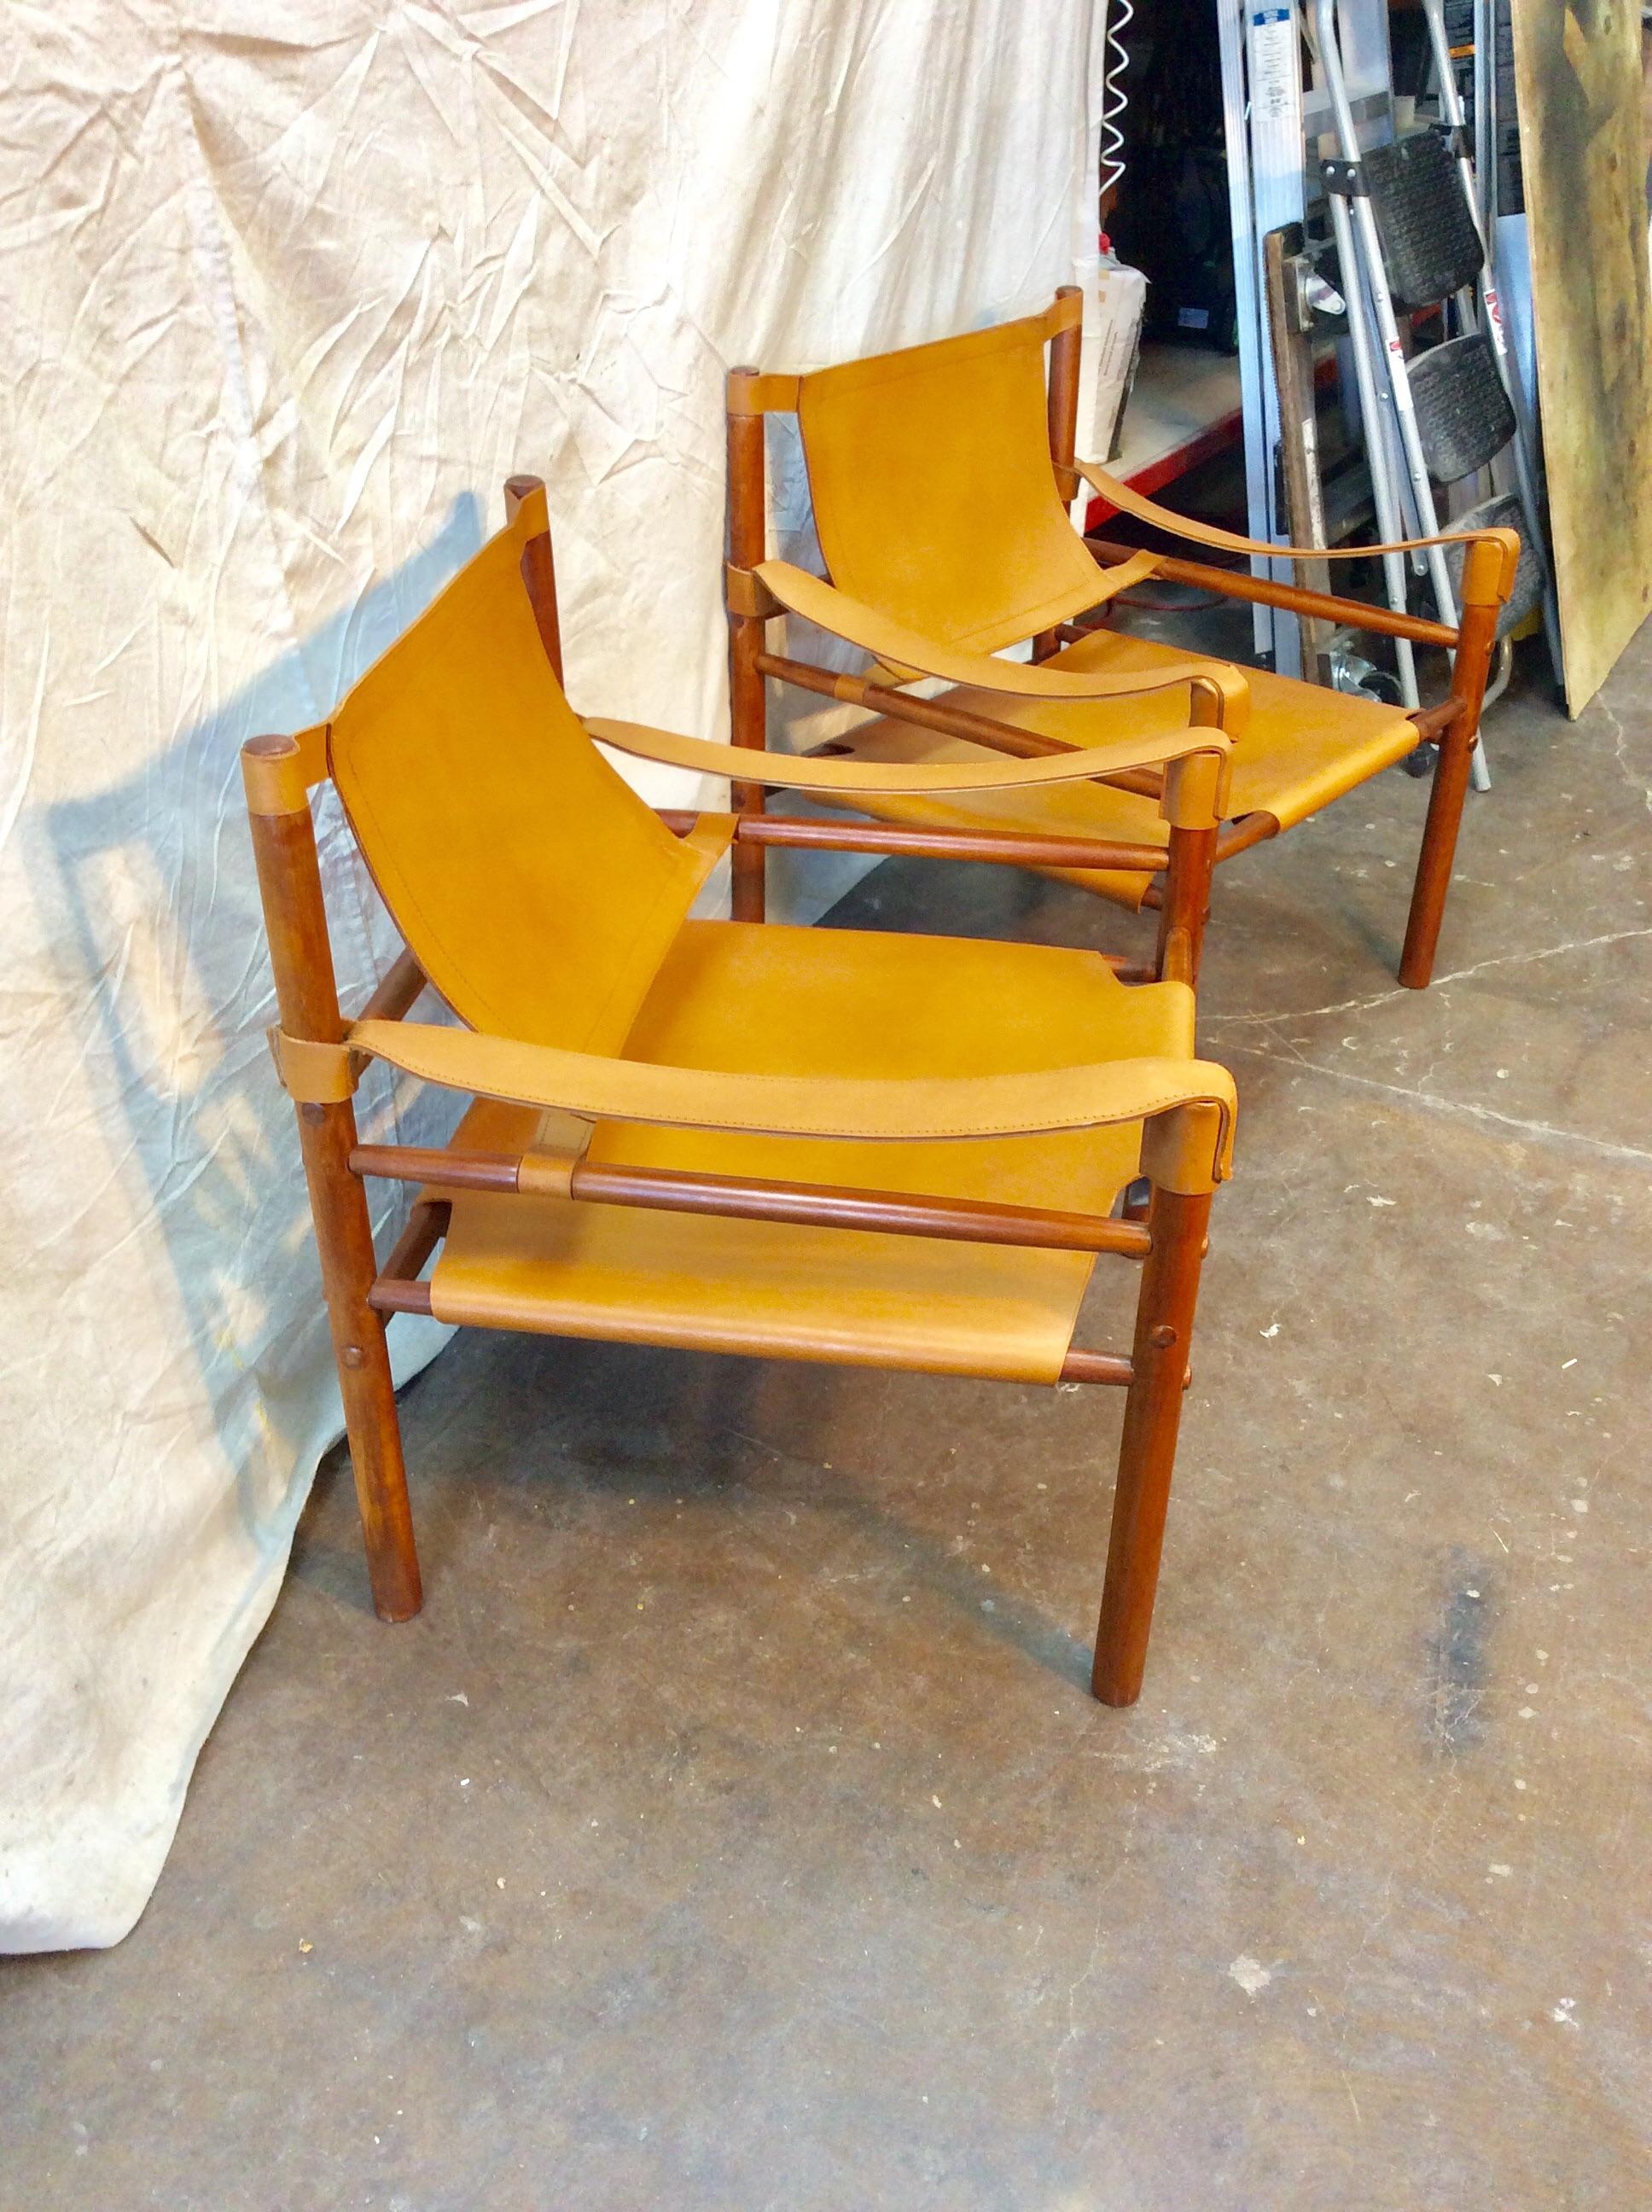 This pair of Mid-Century Modern Leather Sling Safari Chairs were crafted by Argentinian designer Abel Gonzalez in the 1960s. Constructed in a dramatically proportioned layout with straight lines and geometric shapes, the sturdy wood dowled frames